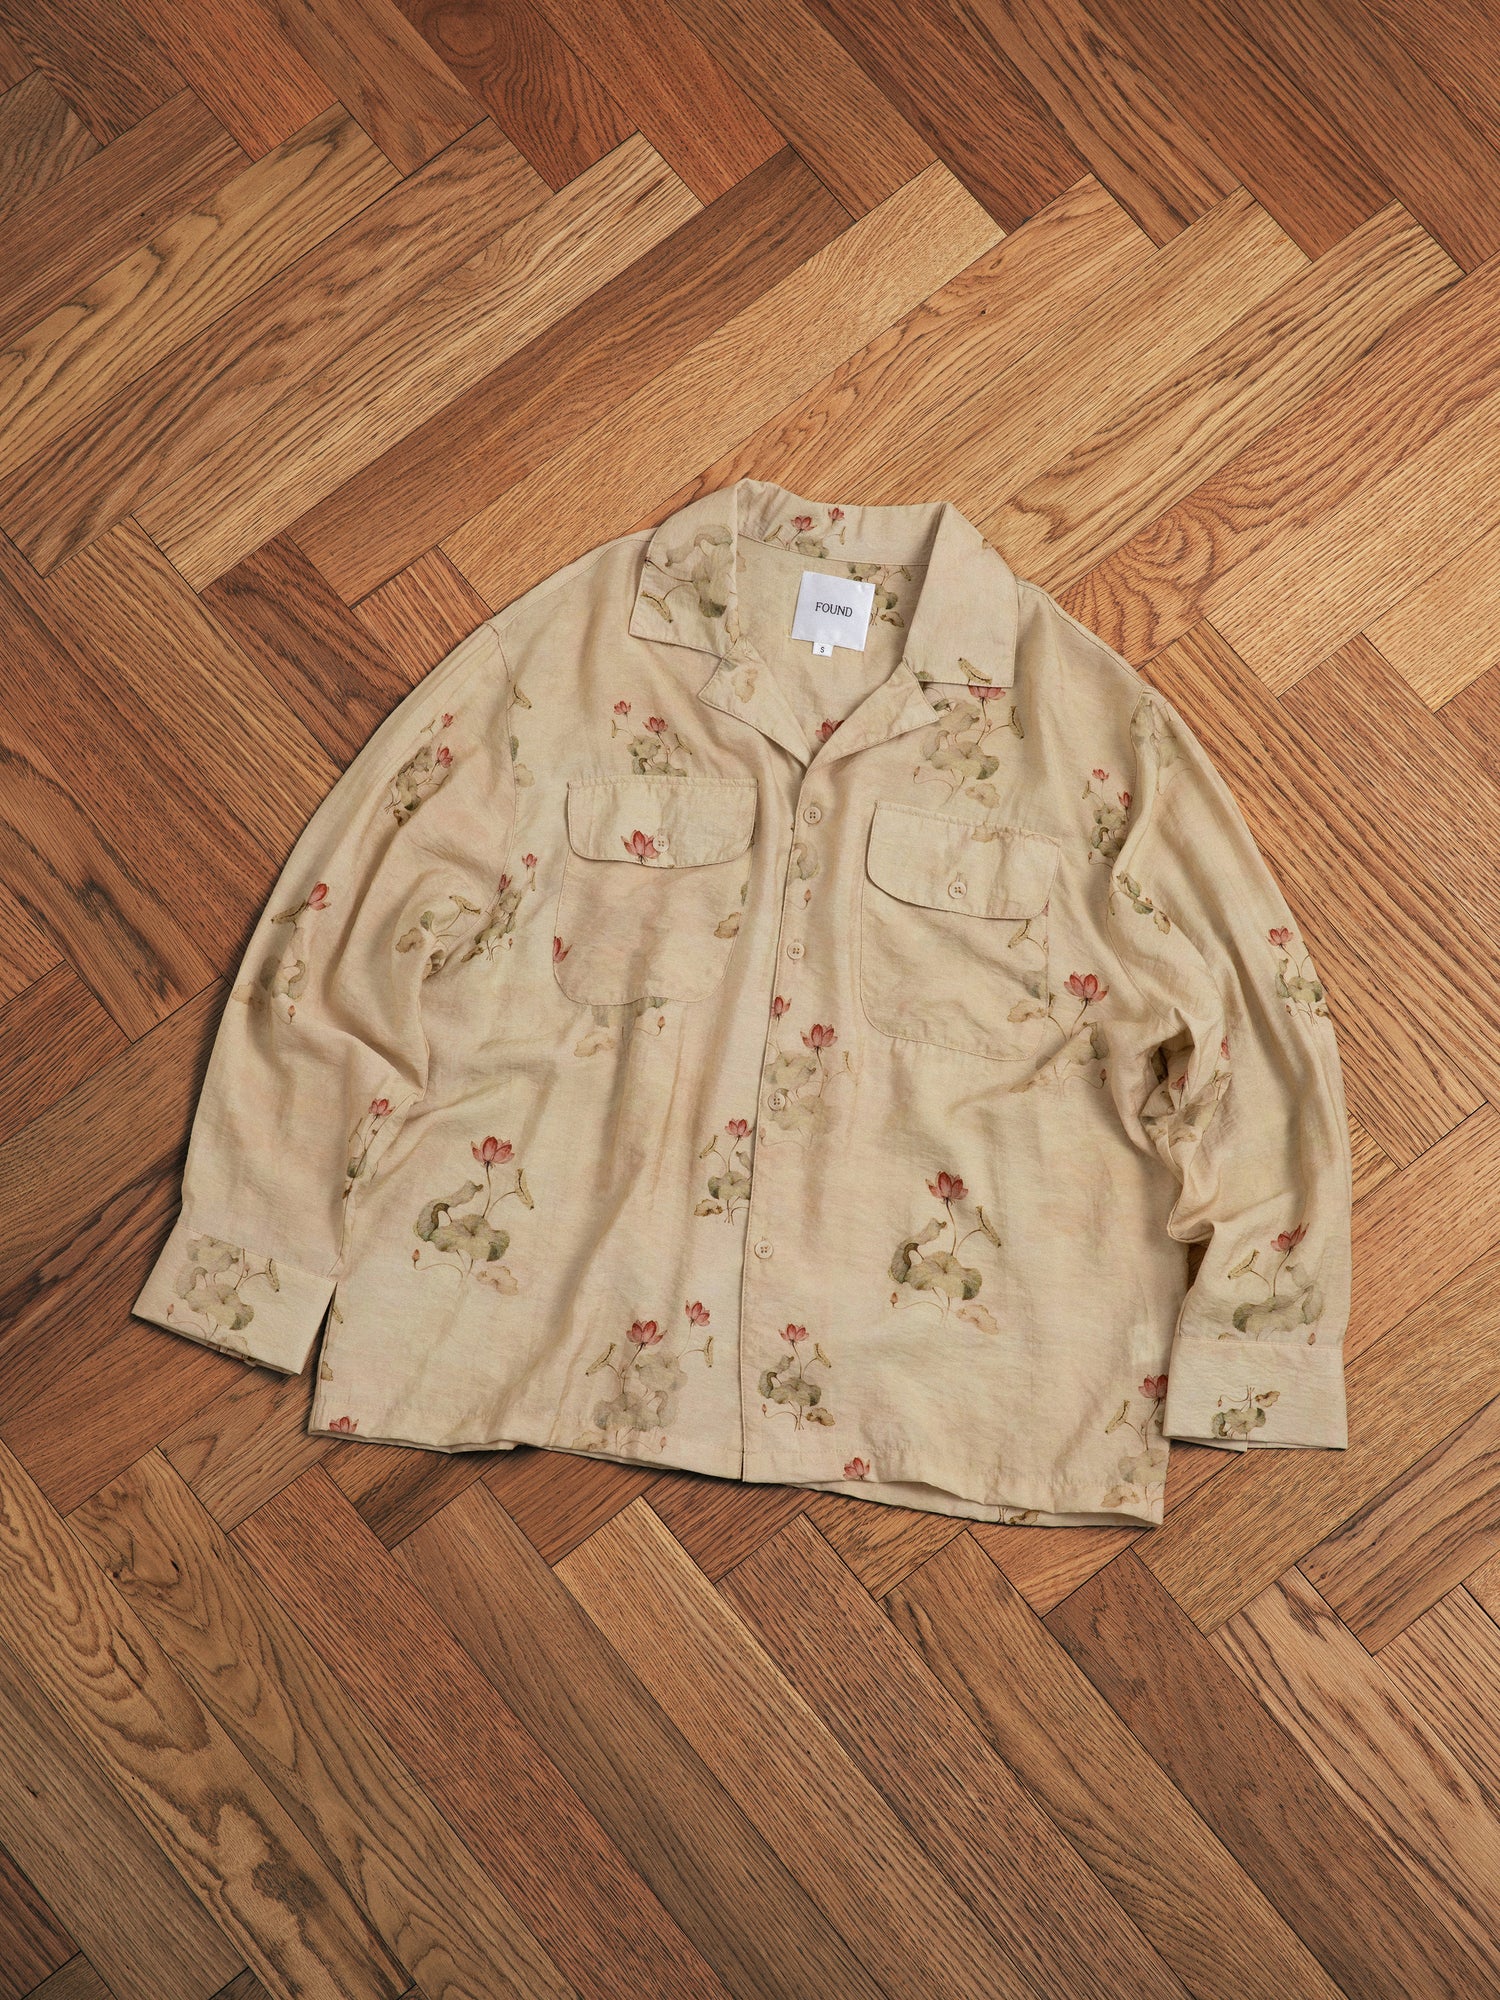 A Found Lotus LS Camp Shirt with flowers on it is sitting on a hardwood floor.